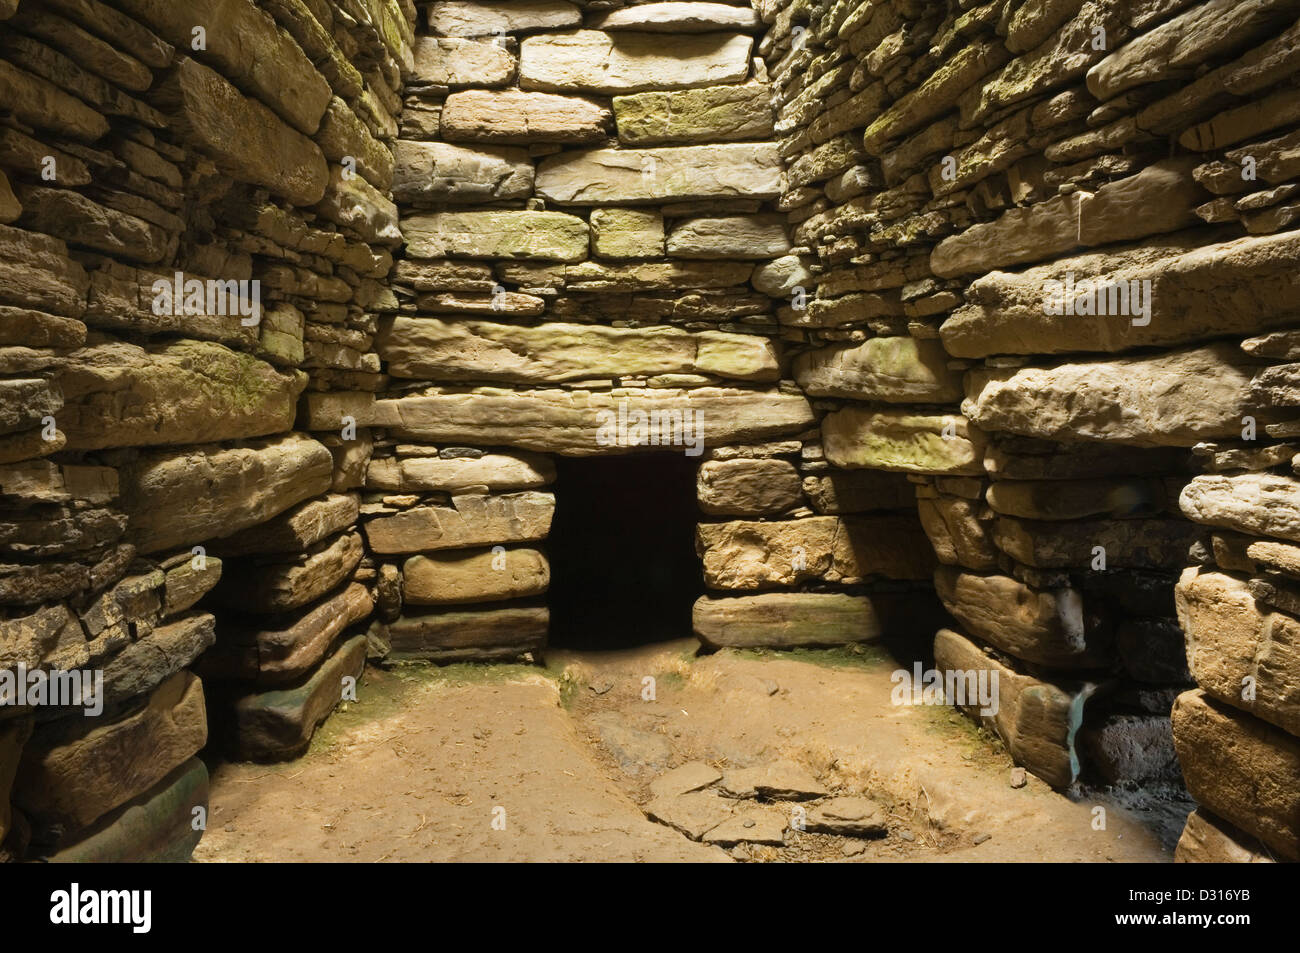 The interior of the Quoyness chambered cairn on the island of Sanday, Orkney Islands, Scotland. Stock Photo